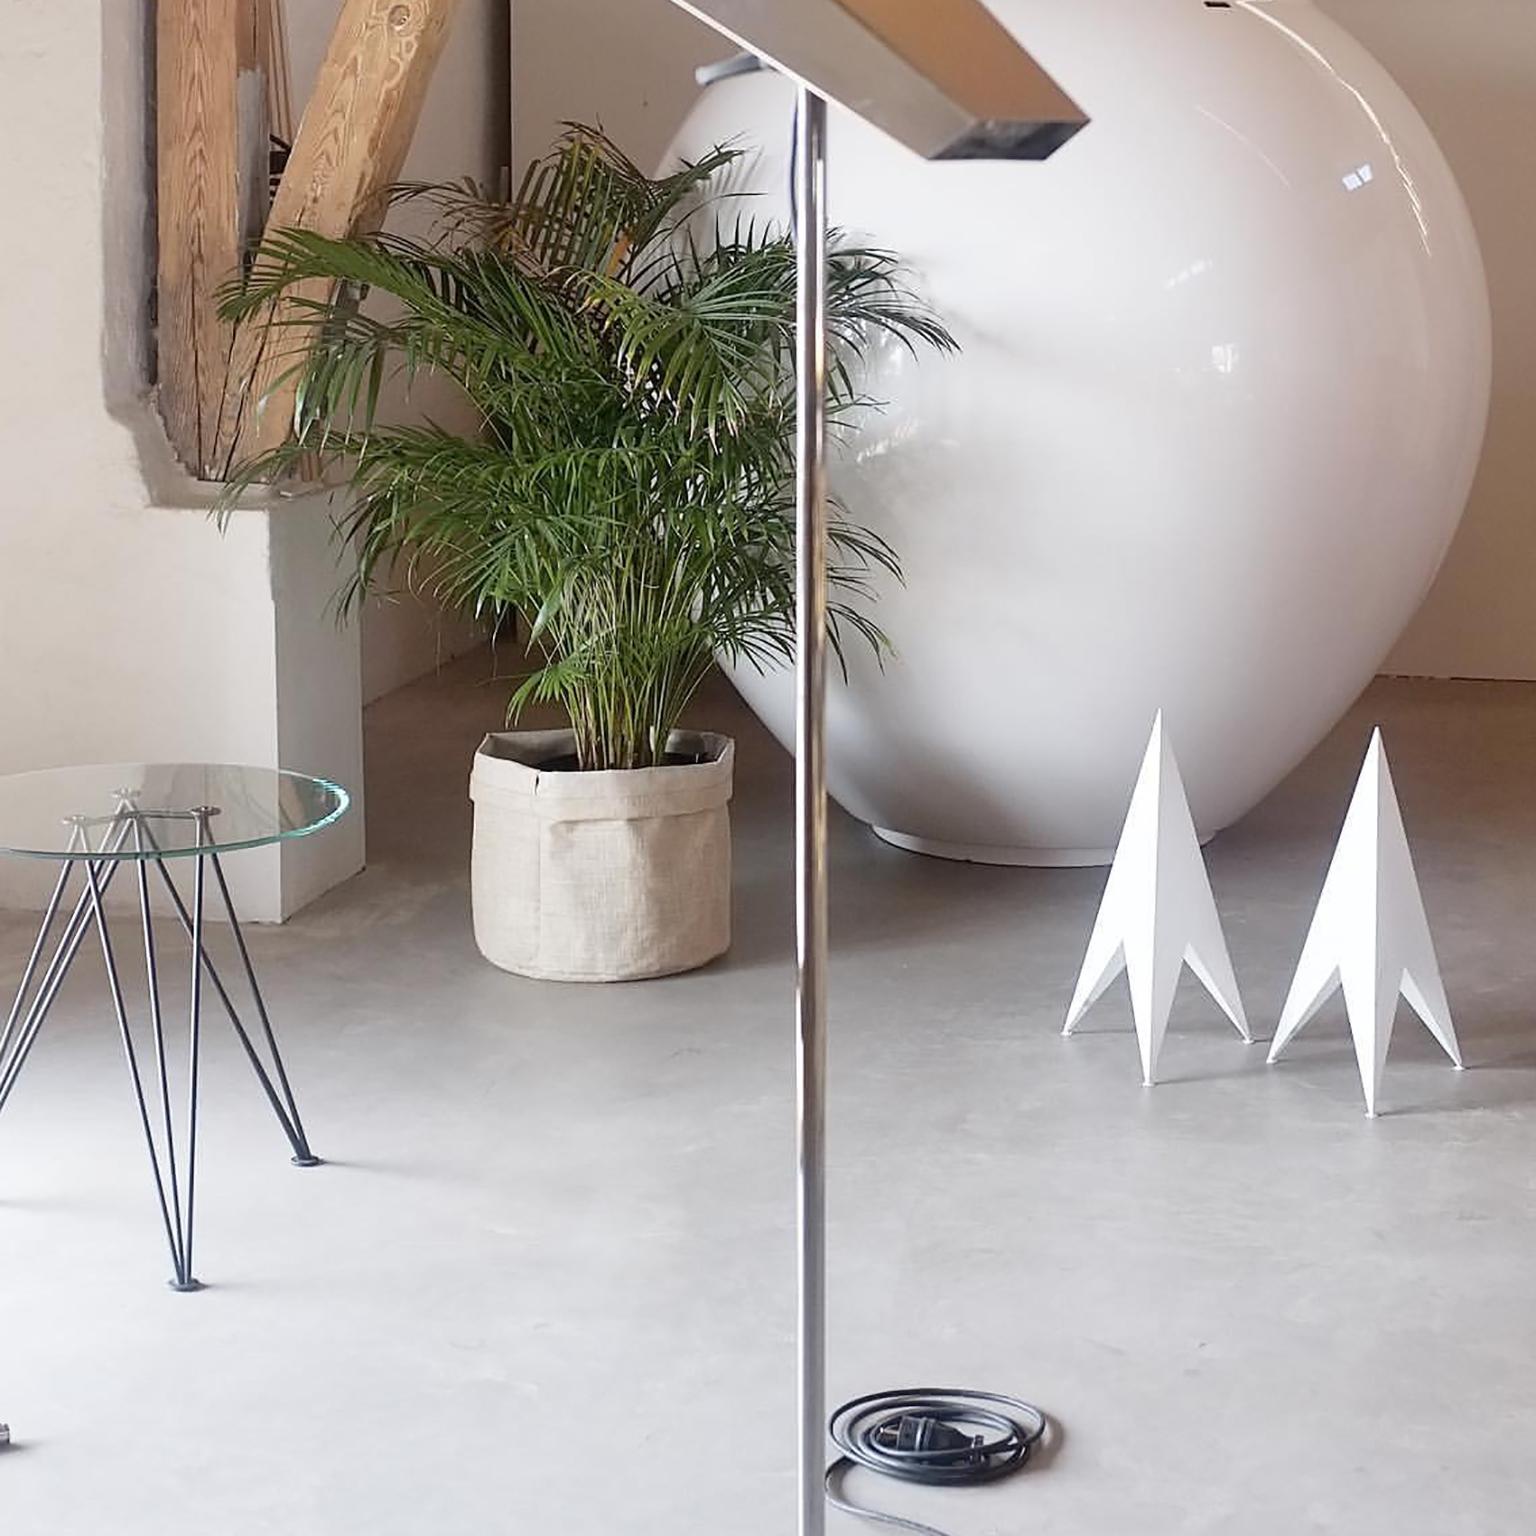 Elegant shape, the Rocket lamp was designed by Jangir Maddadi for Royal Design, Sweden, 2013.
Two pieces are available, and the larger version is available; check our other listings.
Produced in a limited edition, nowadays, it is not in production